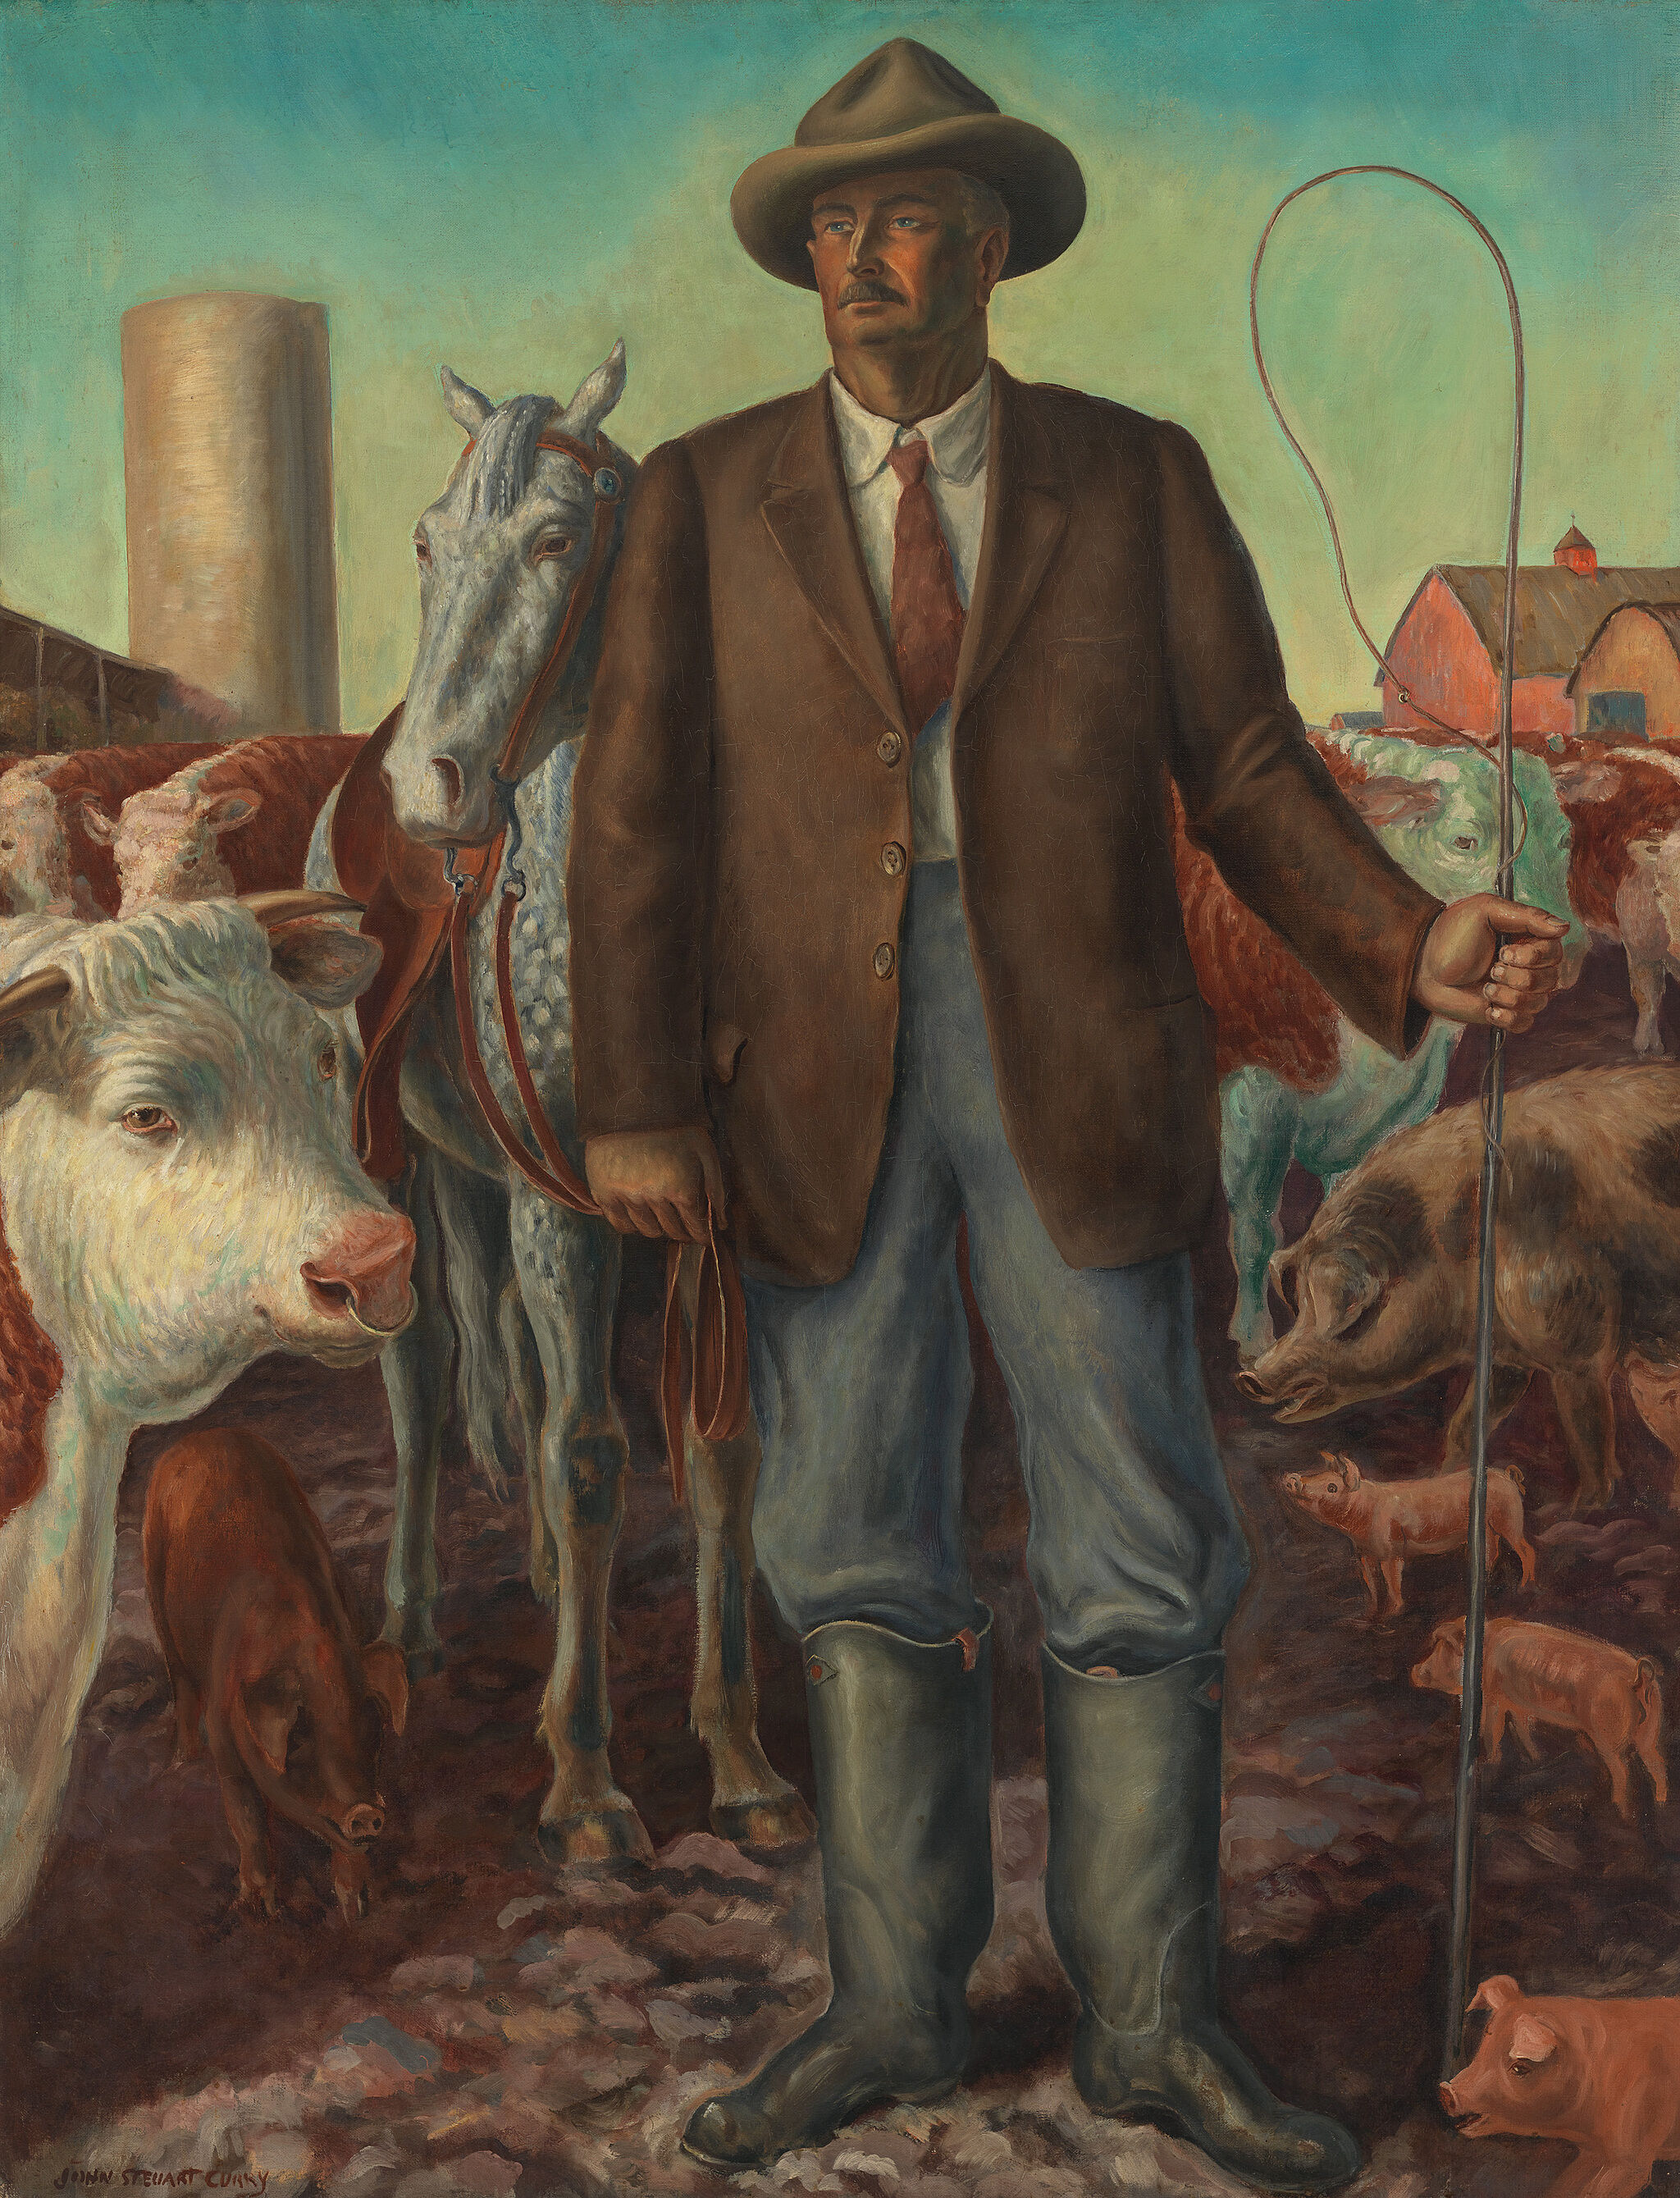 Painting of a man in a hat holding a whip in his left hand surrounded by livestock.